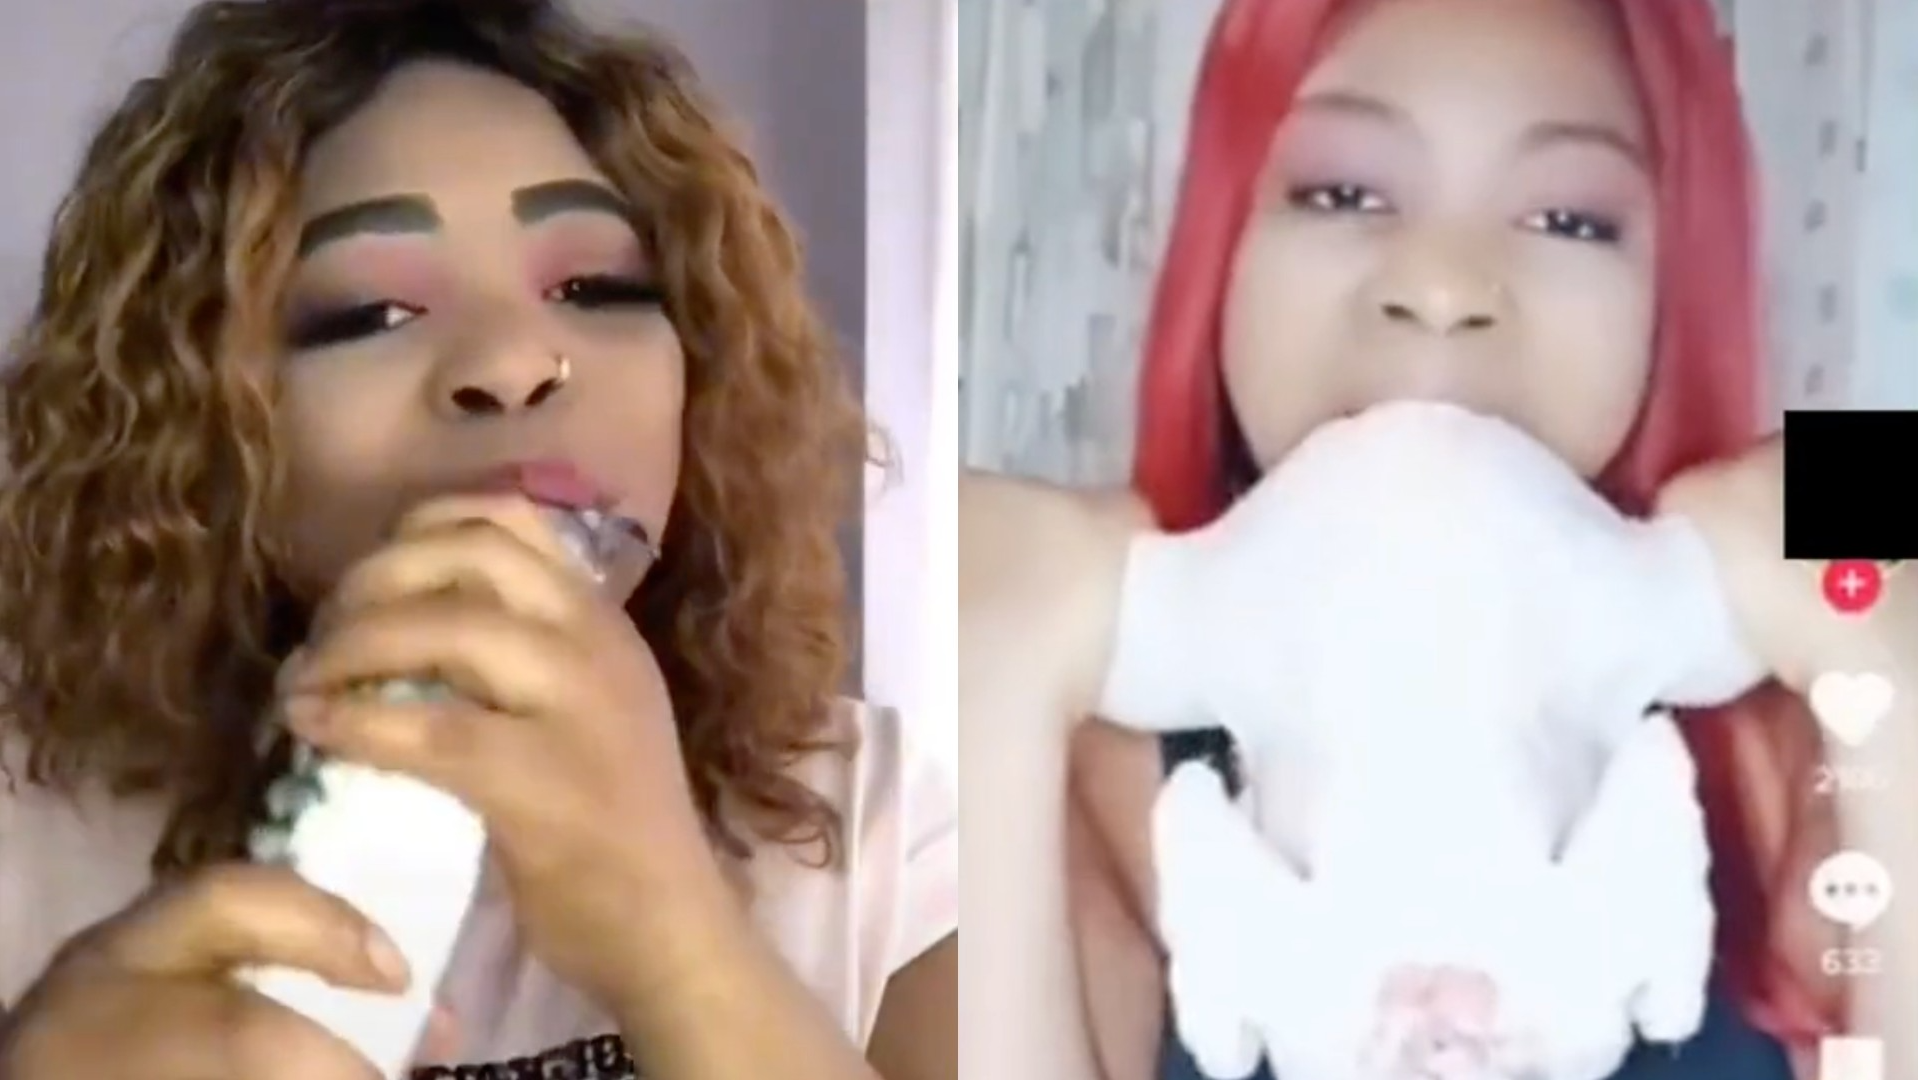 Jasmine White403 Eating Chicken On TikTok Video Viral On Twitter: Did She Really Eat Raw Chicken And Fish?